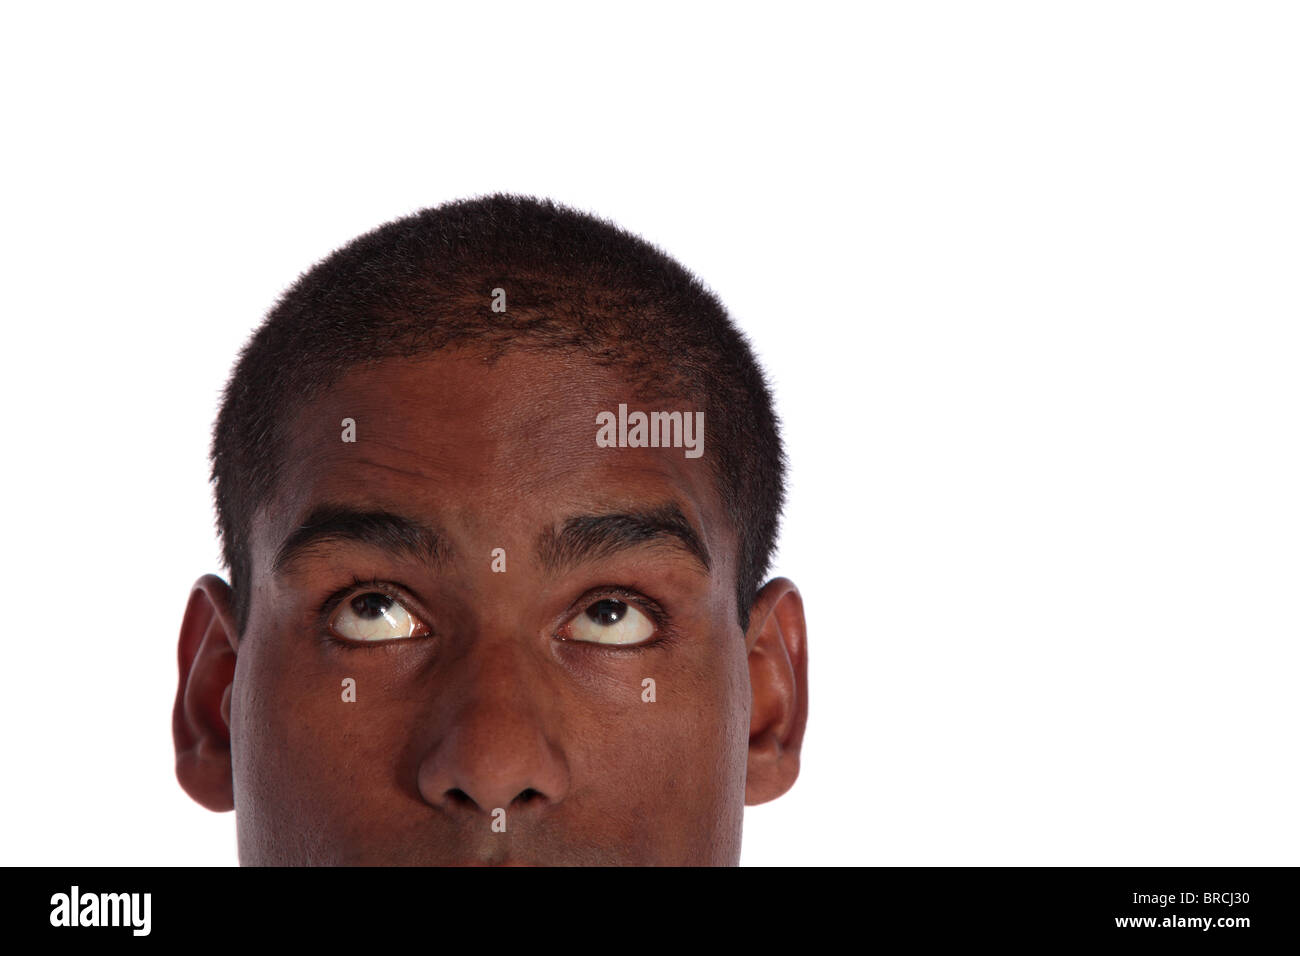 Face of an attractive dark-skinned man. All on white background. Stock Photo